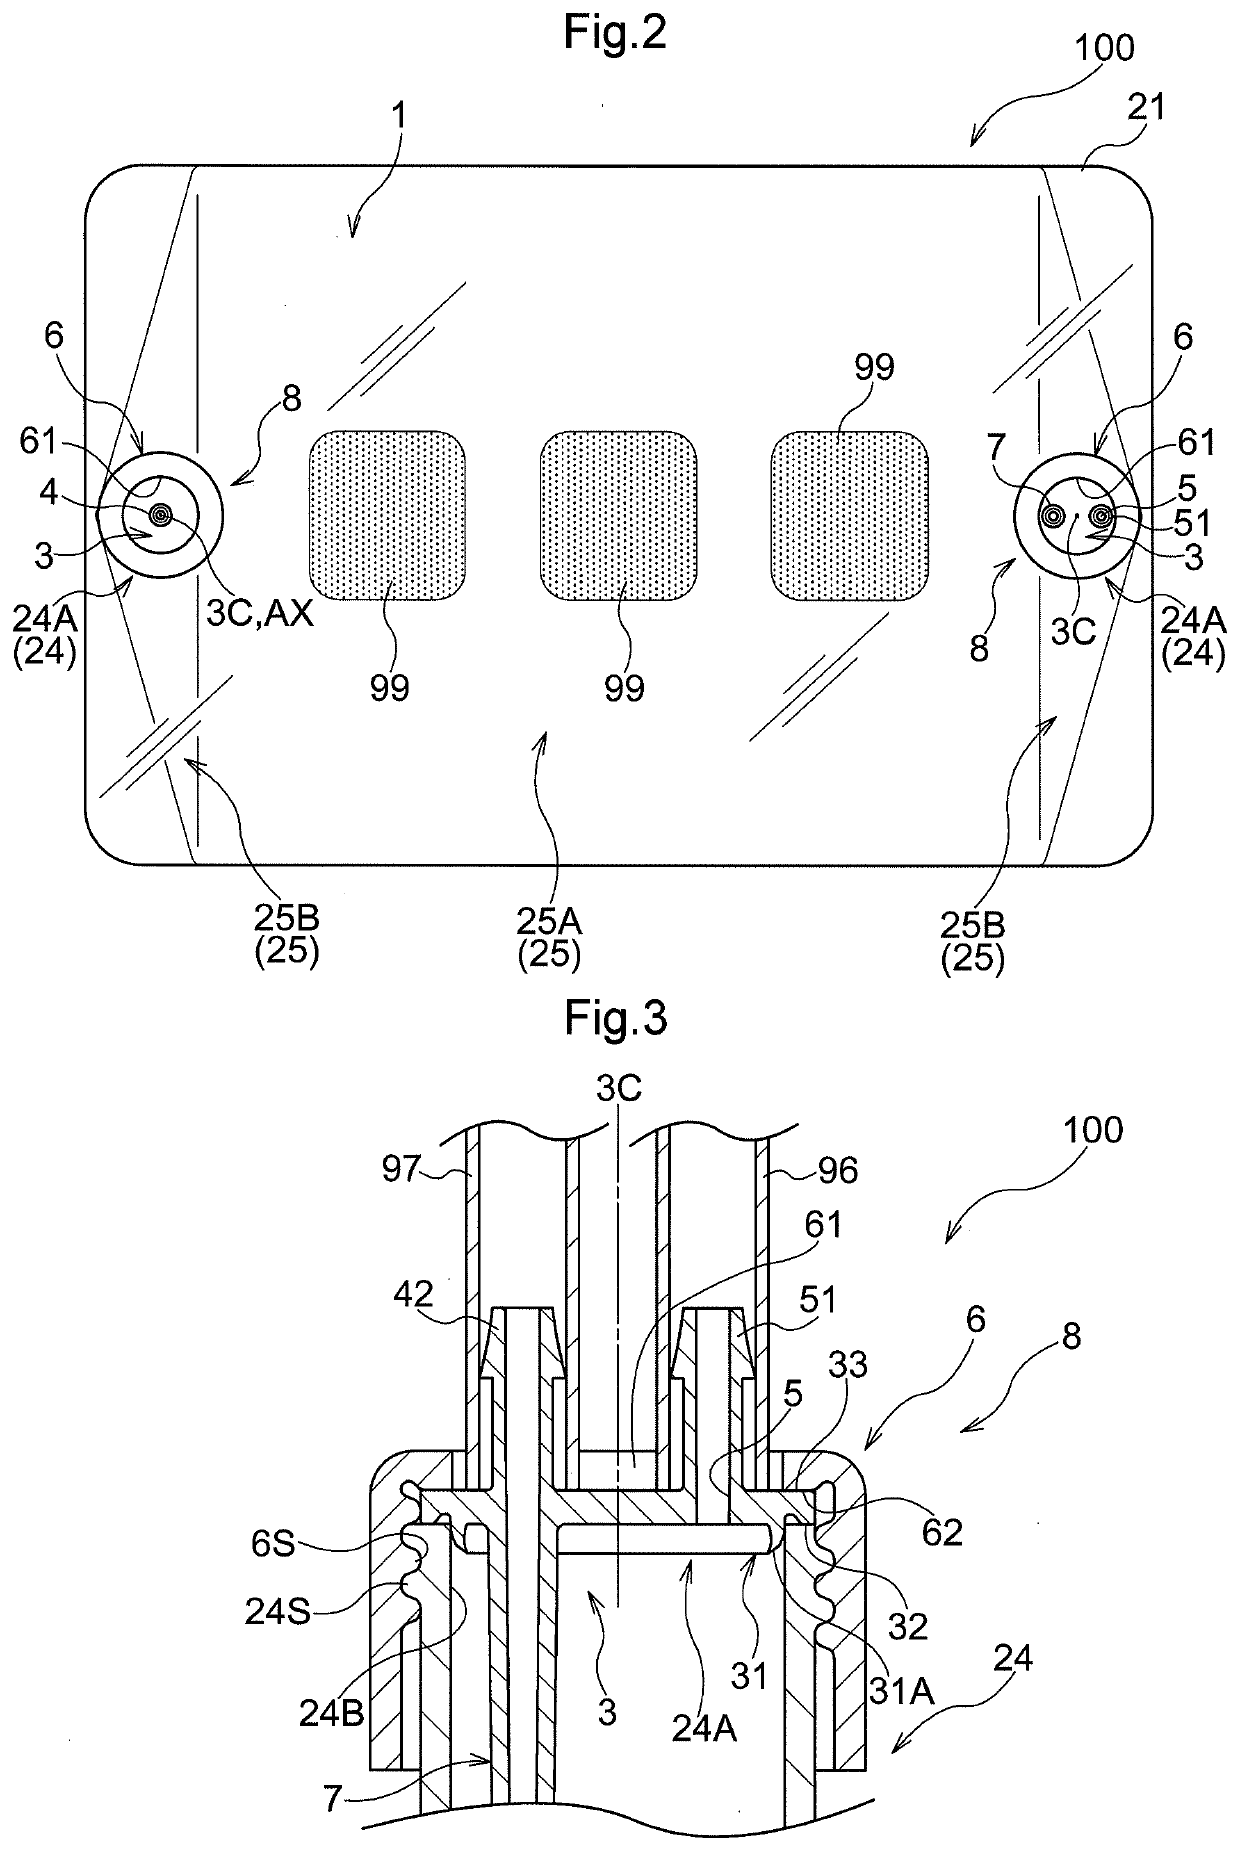 Culture Vessel and Cell Culture Device